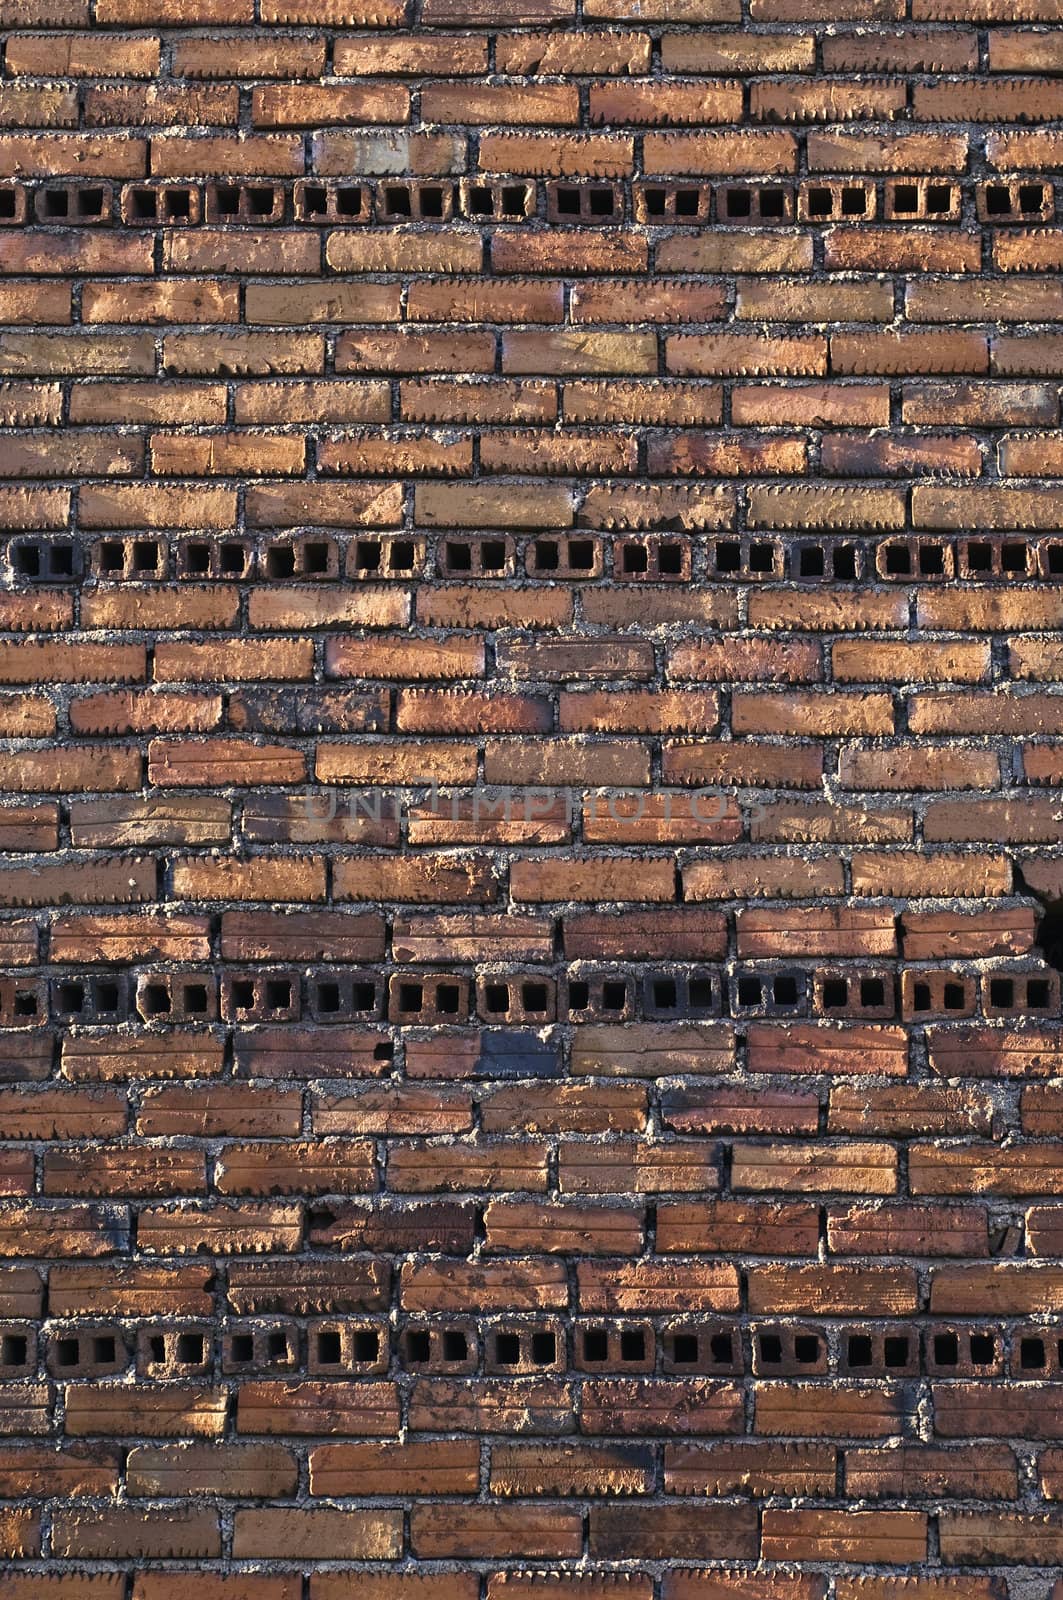 Rugged brick wall in an unfinished building
